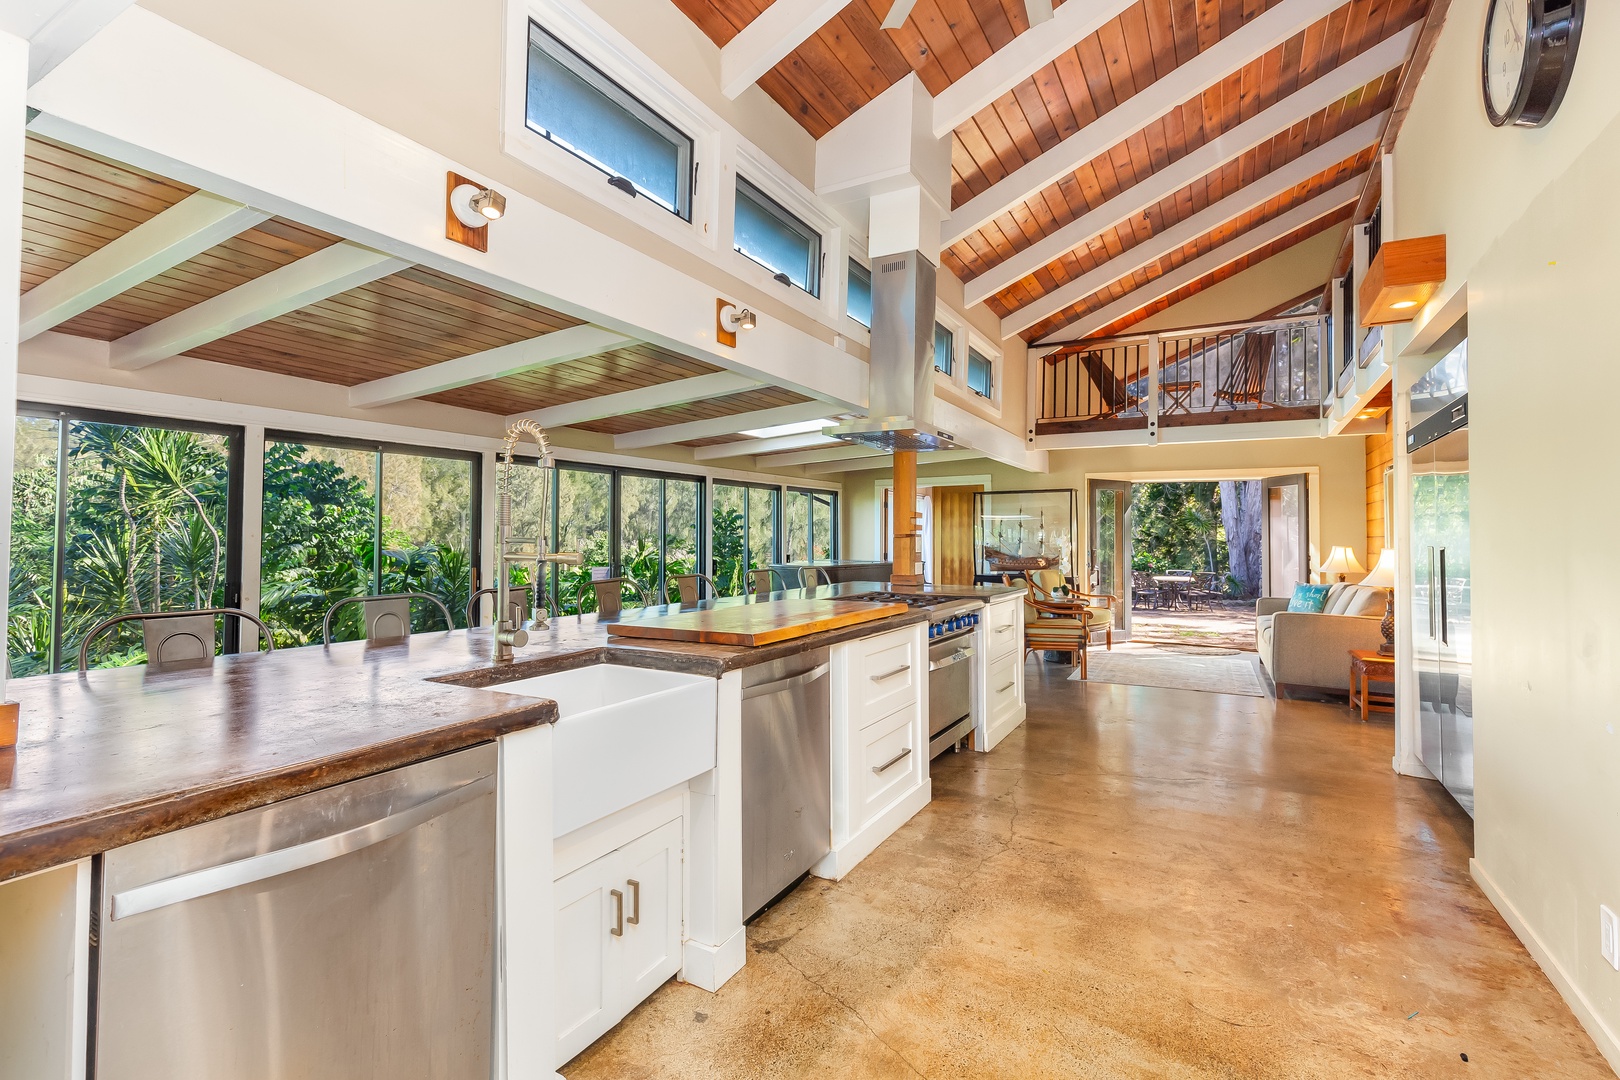 Haleiwa Vacation Rentals, Mele Makana - There are amazing views of the garden and tropical greenery right from the kitchen